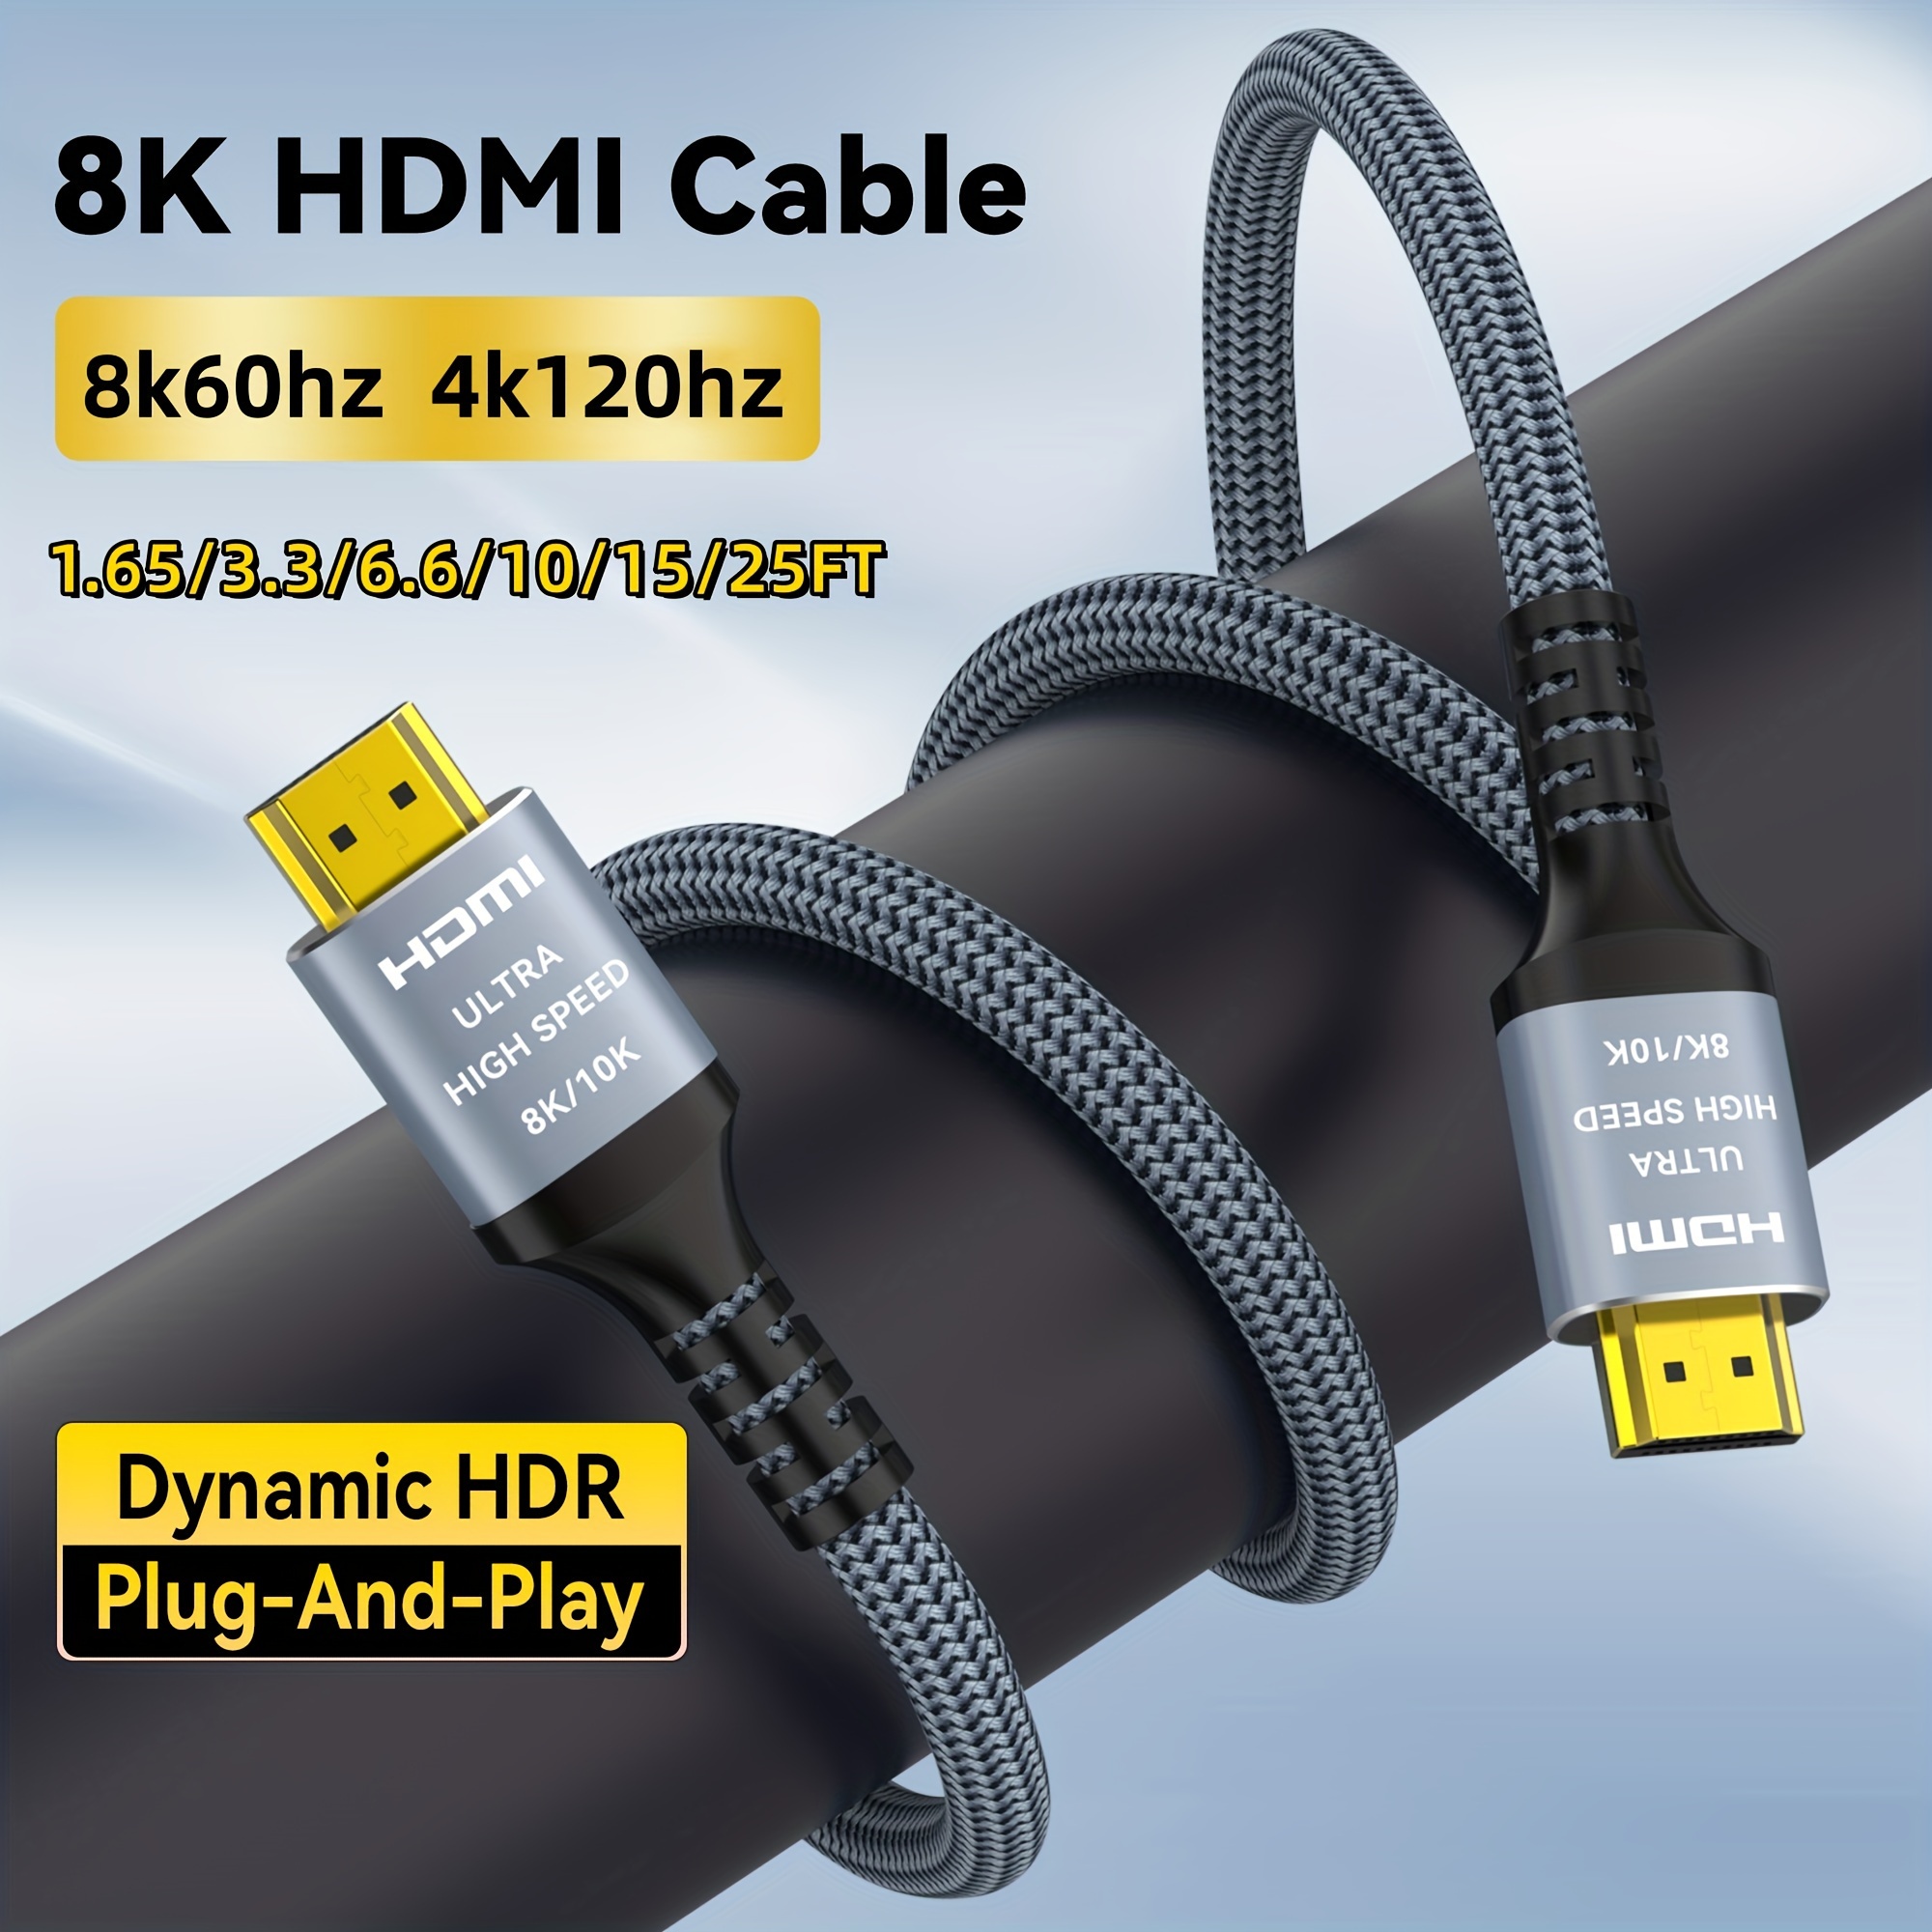 v2.0b HDTV Cable Ultra High HDMI Speed 3D HD Gold HDR 4K 2160p HDMI cable  HDMI Display Cable 144hz